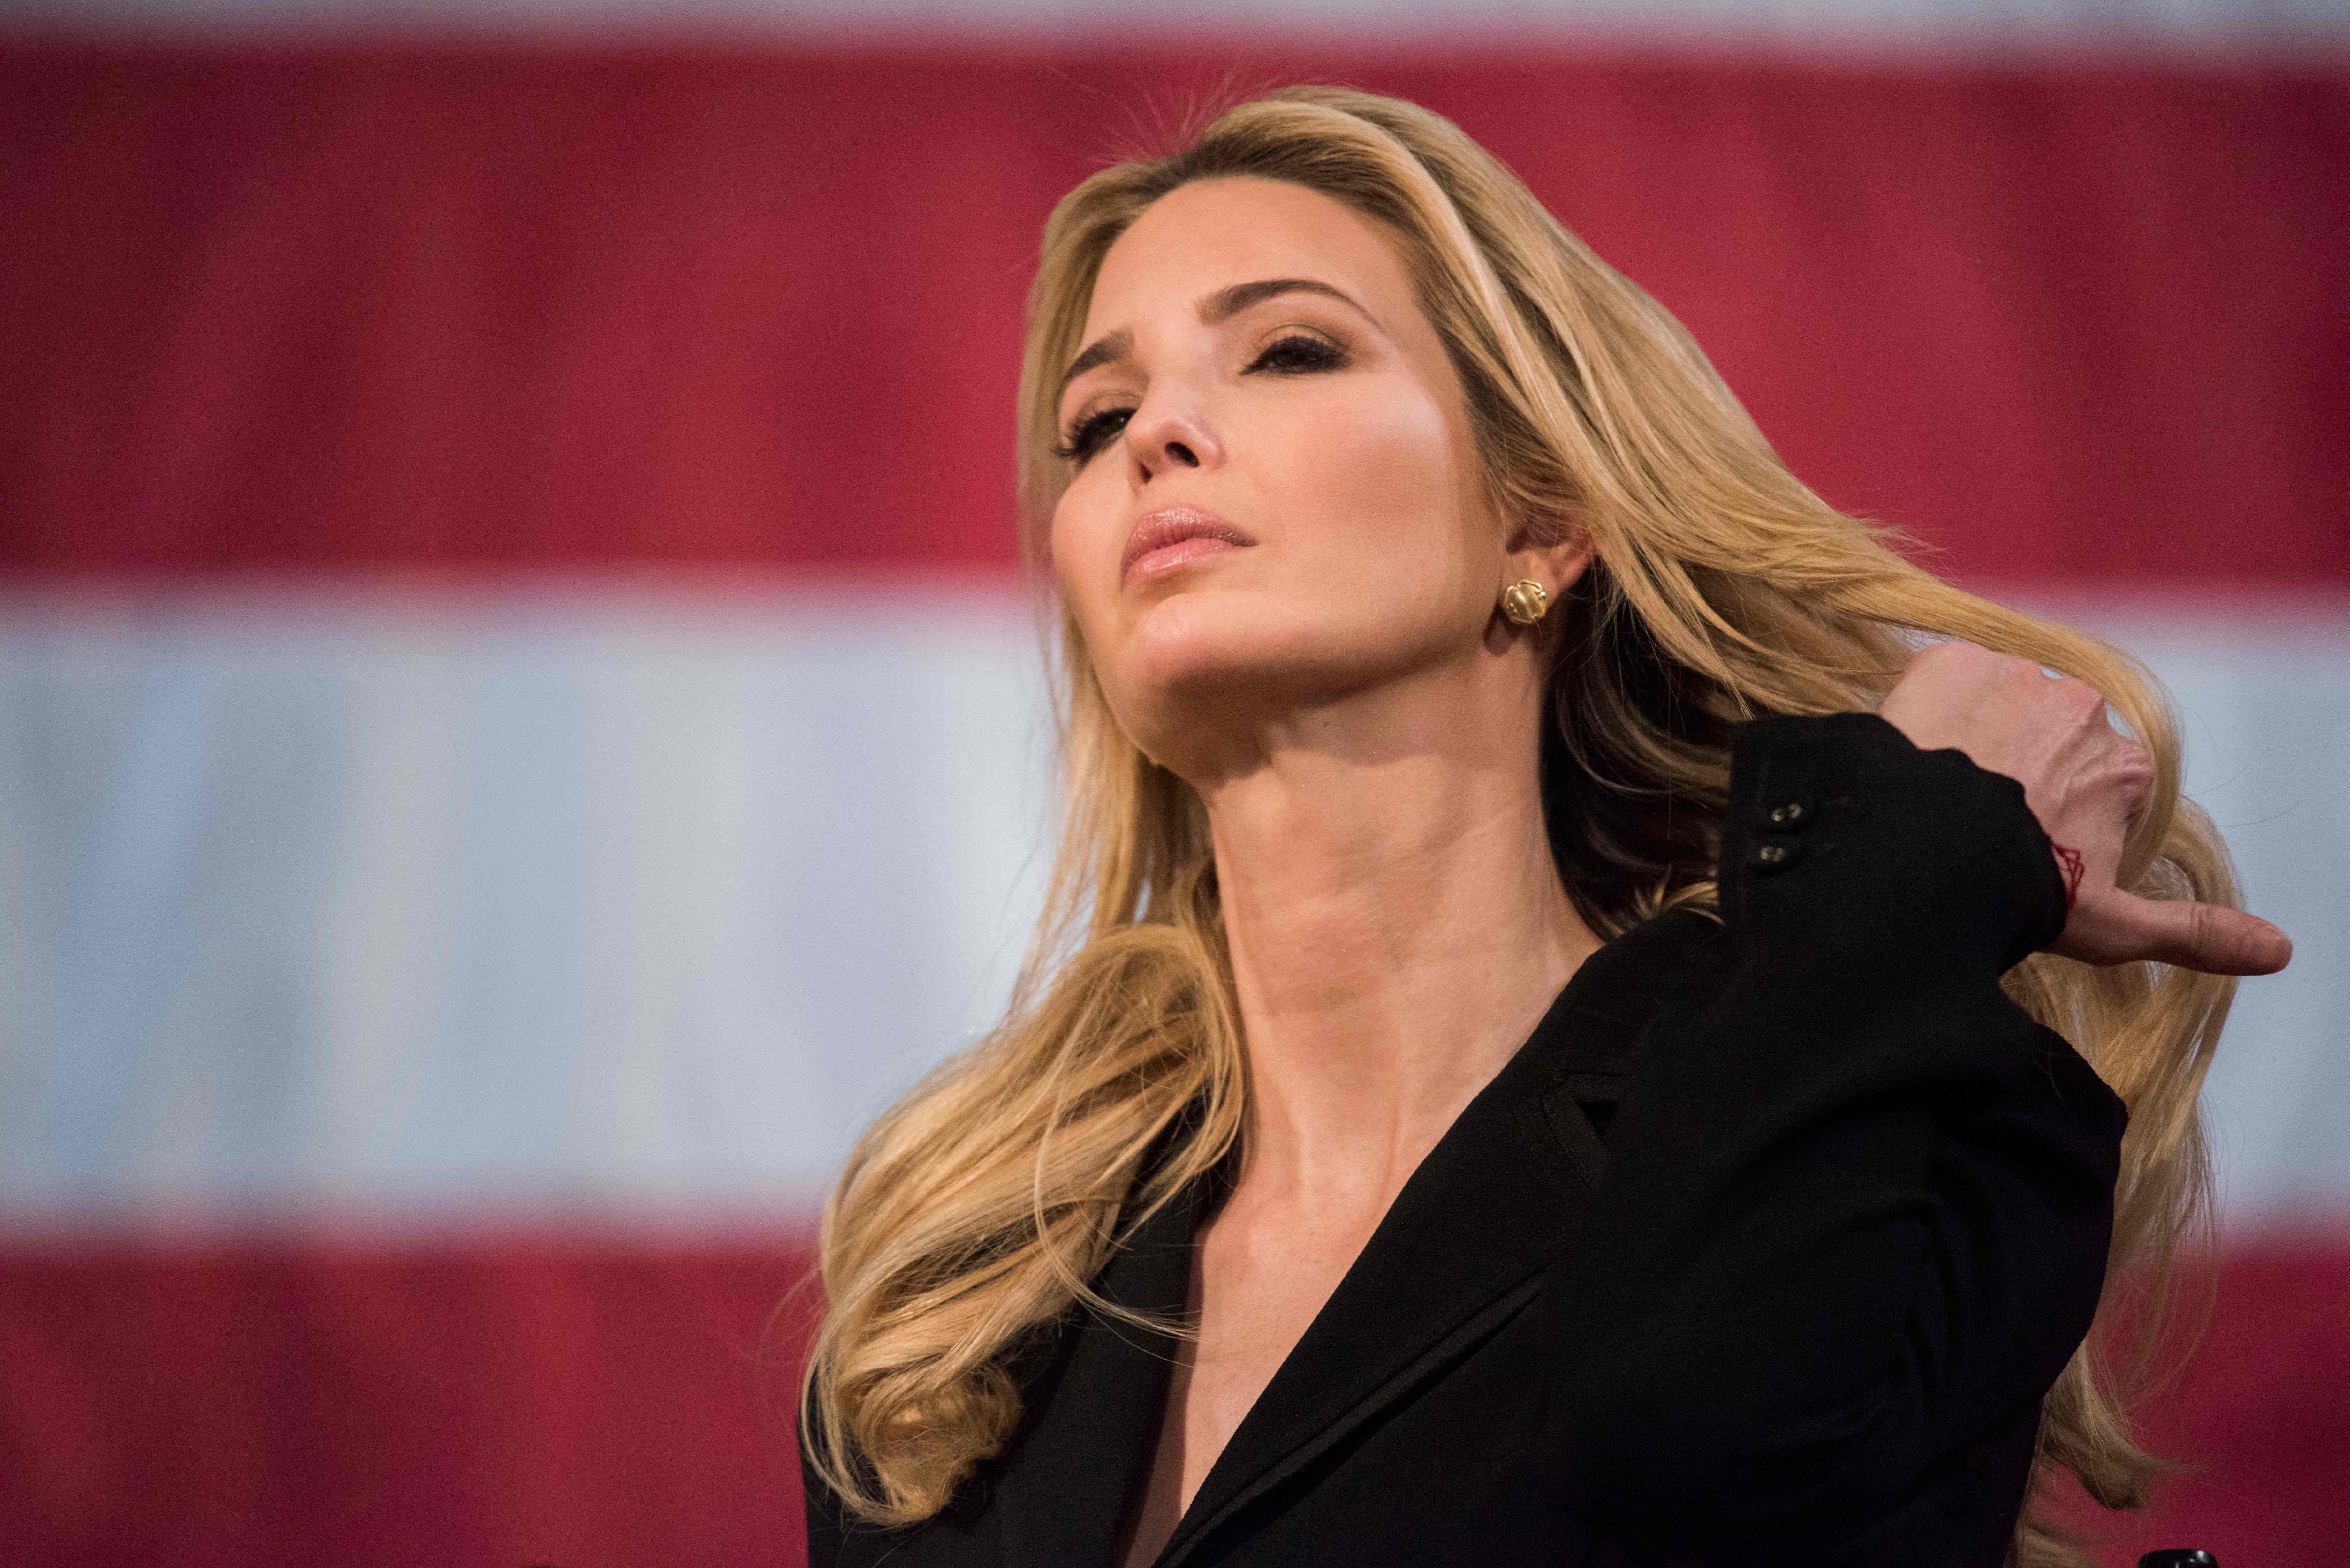 From manufacturing abroad when her father was denouncing outsourcing, to using fur and allegedly copying a shoe, to getting a free plug from a White House adviser, the Ivanka Trump brand made headlines for the wrong reasons